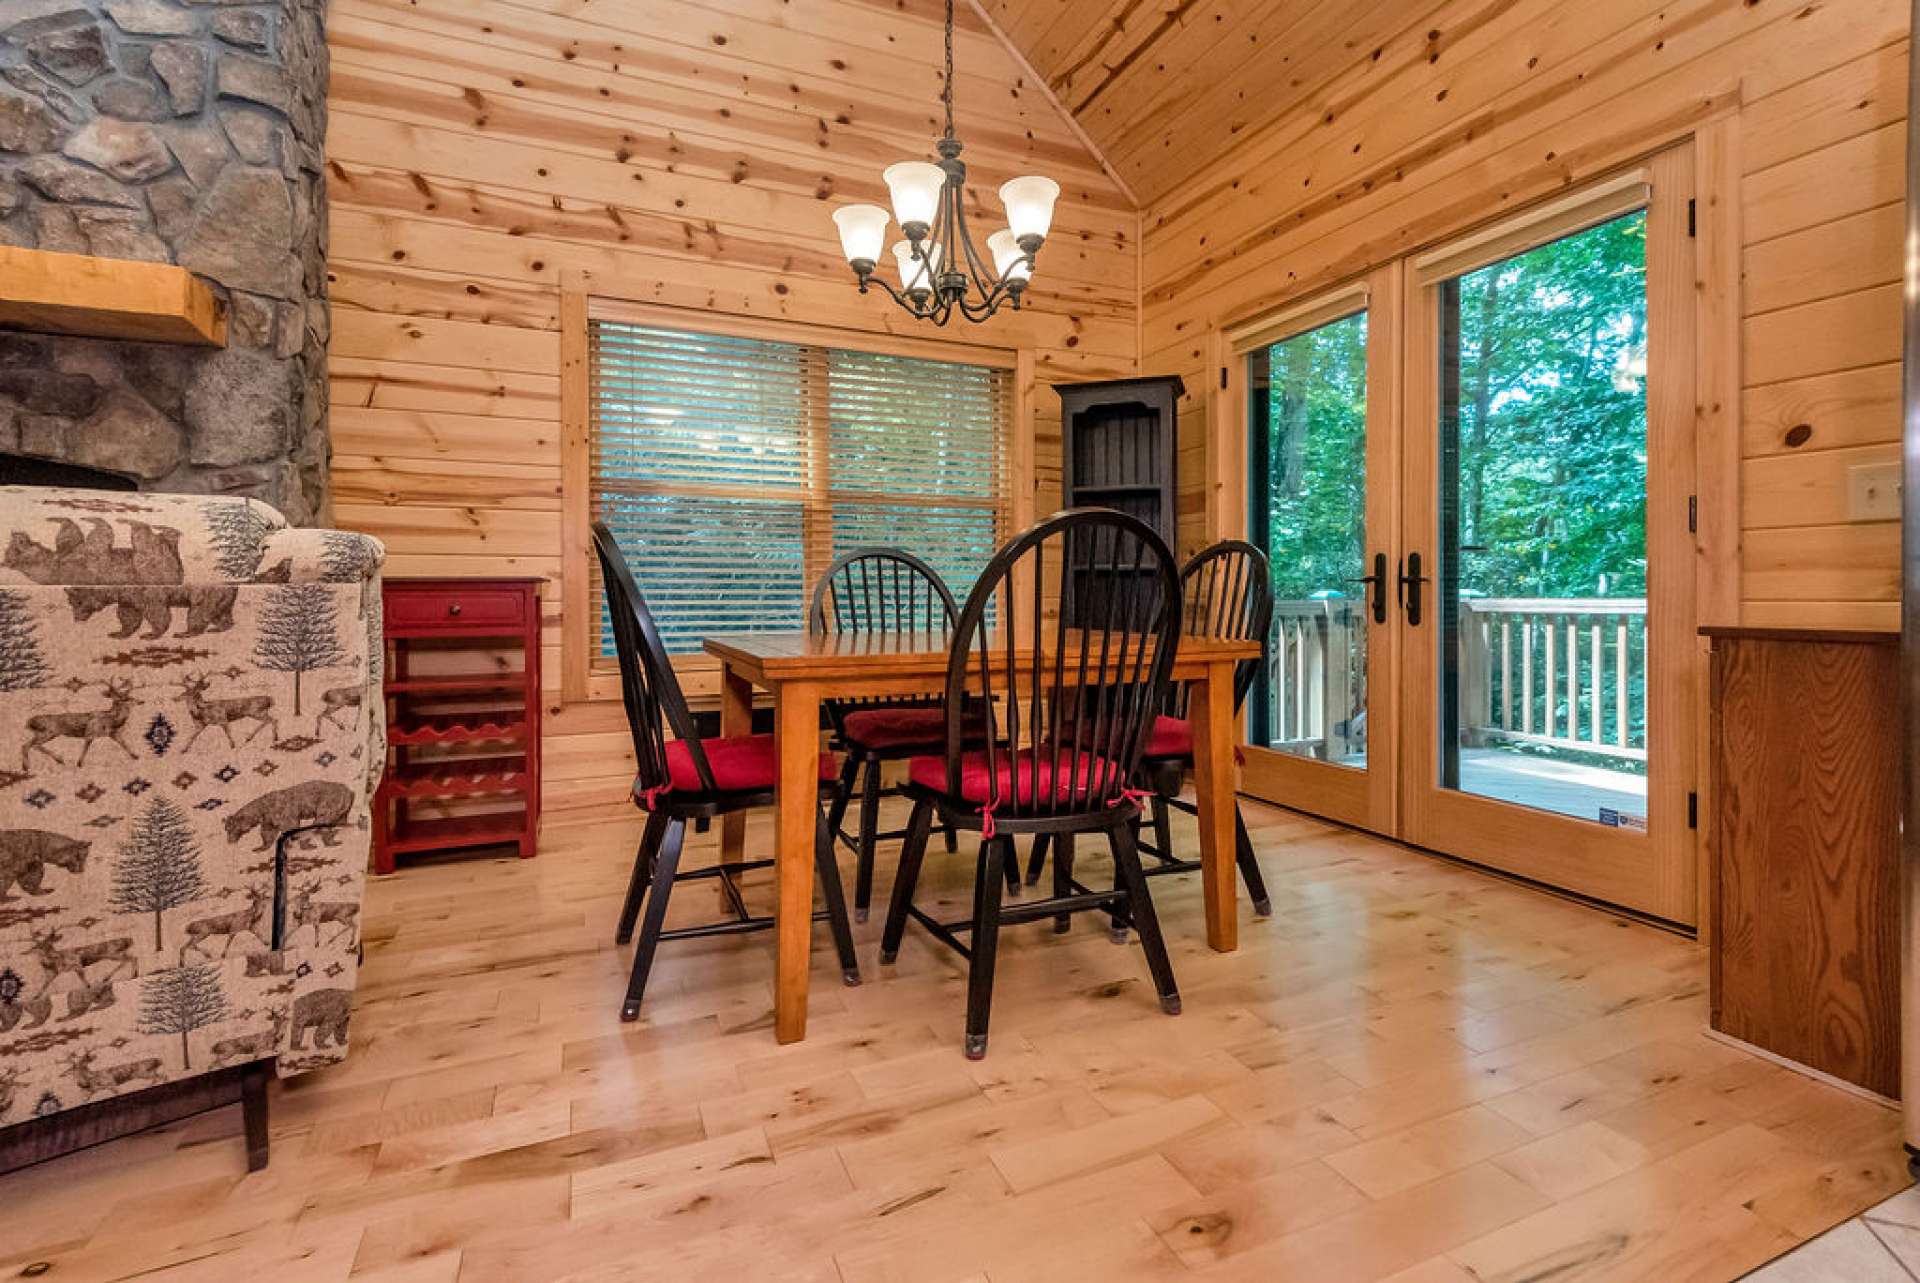 Dining area leads to the back deck.